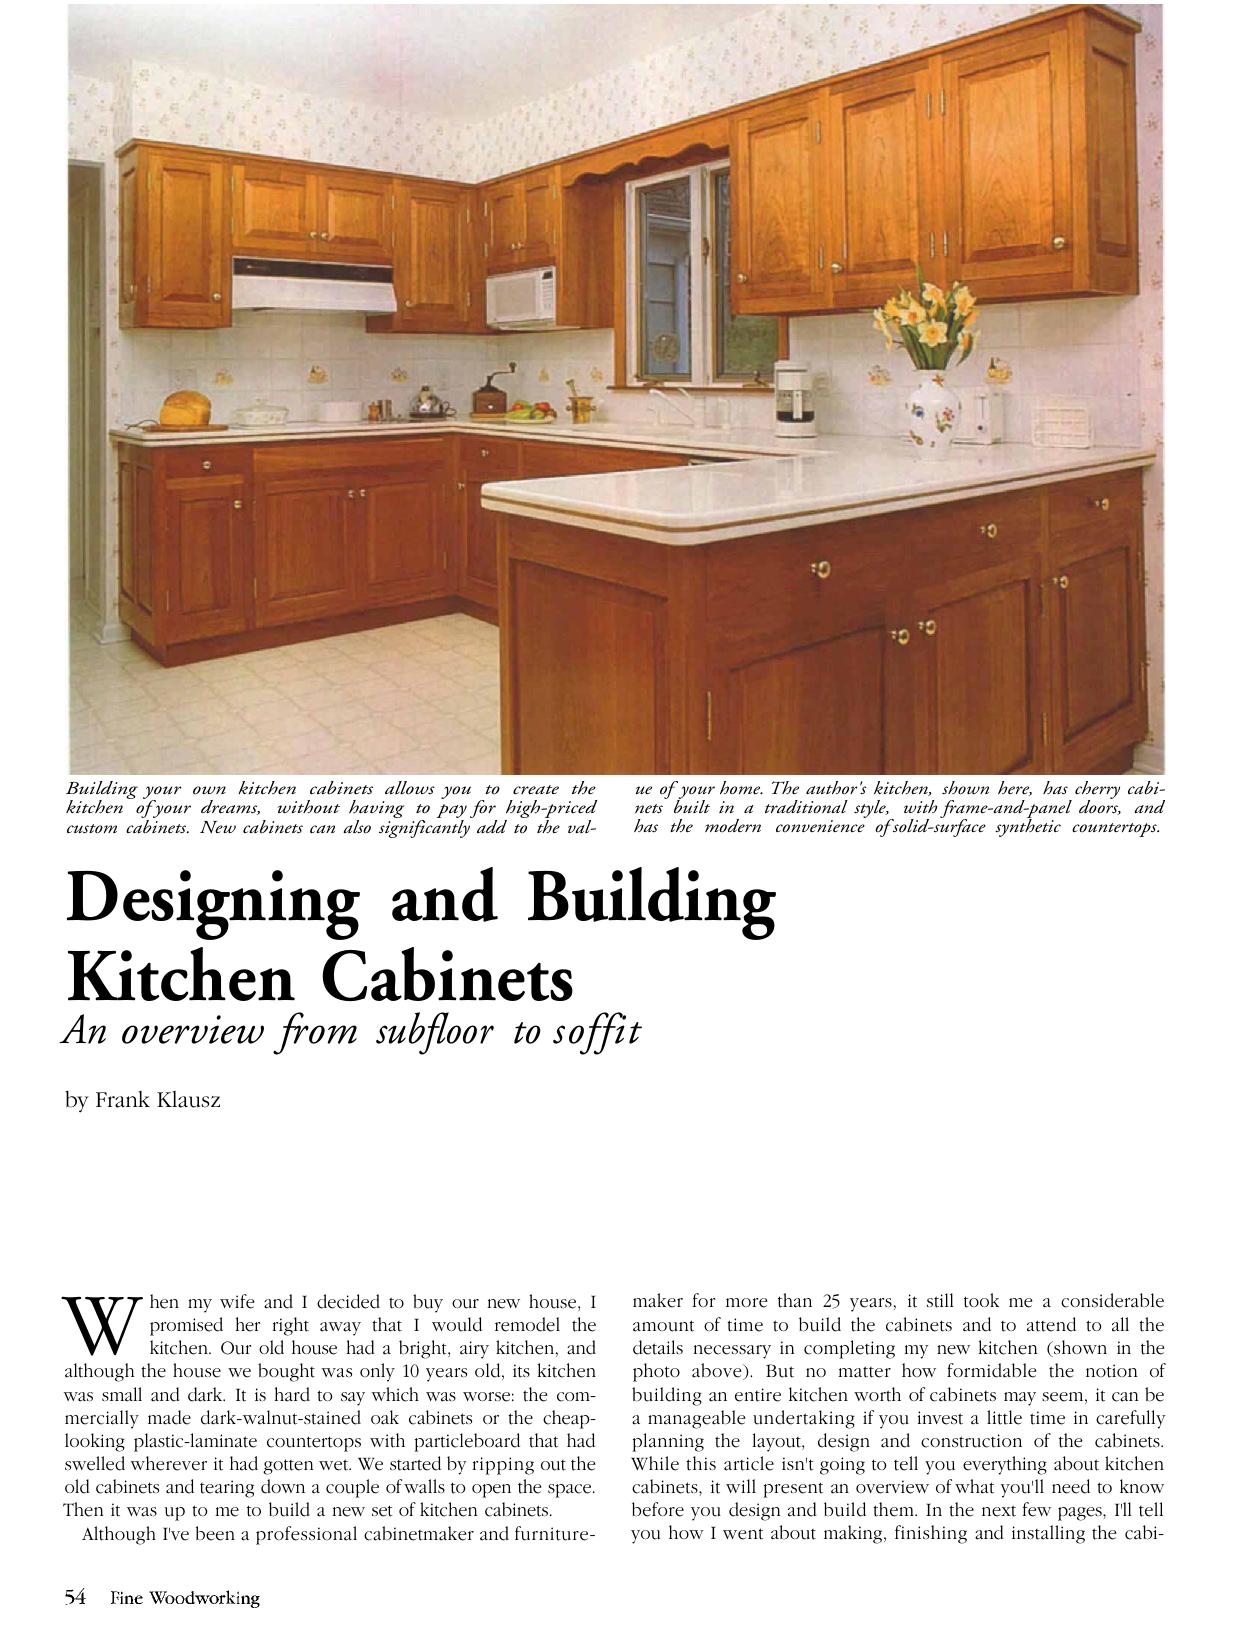 Designing and Building Kitchen Cabinets by Frank Klausz